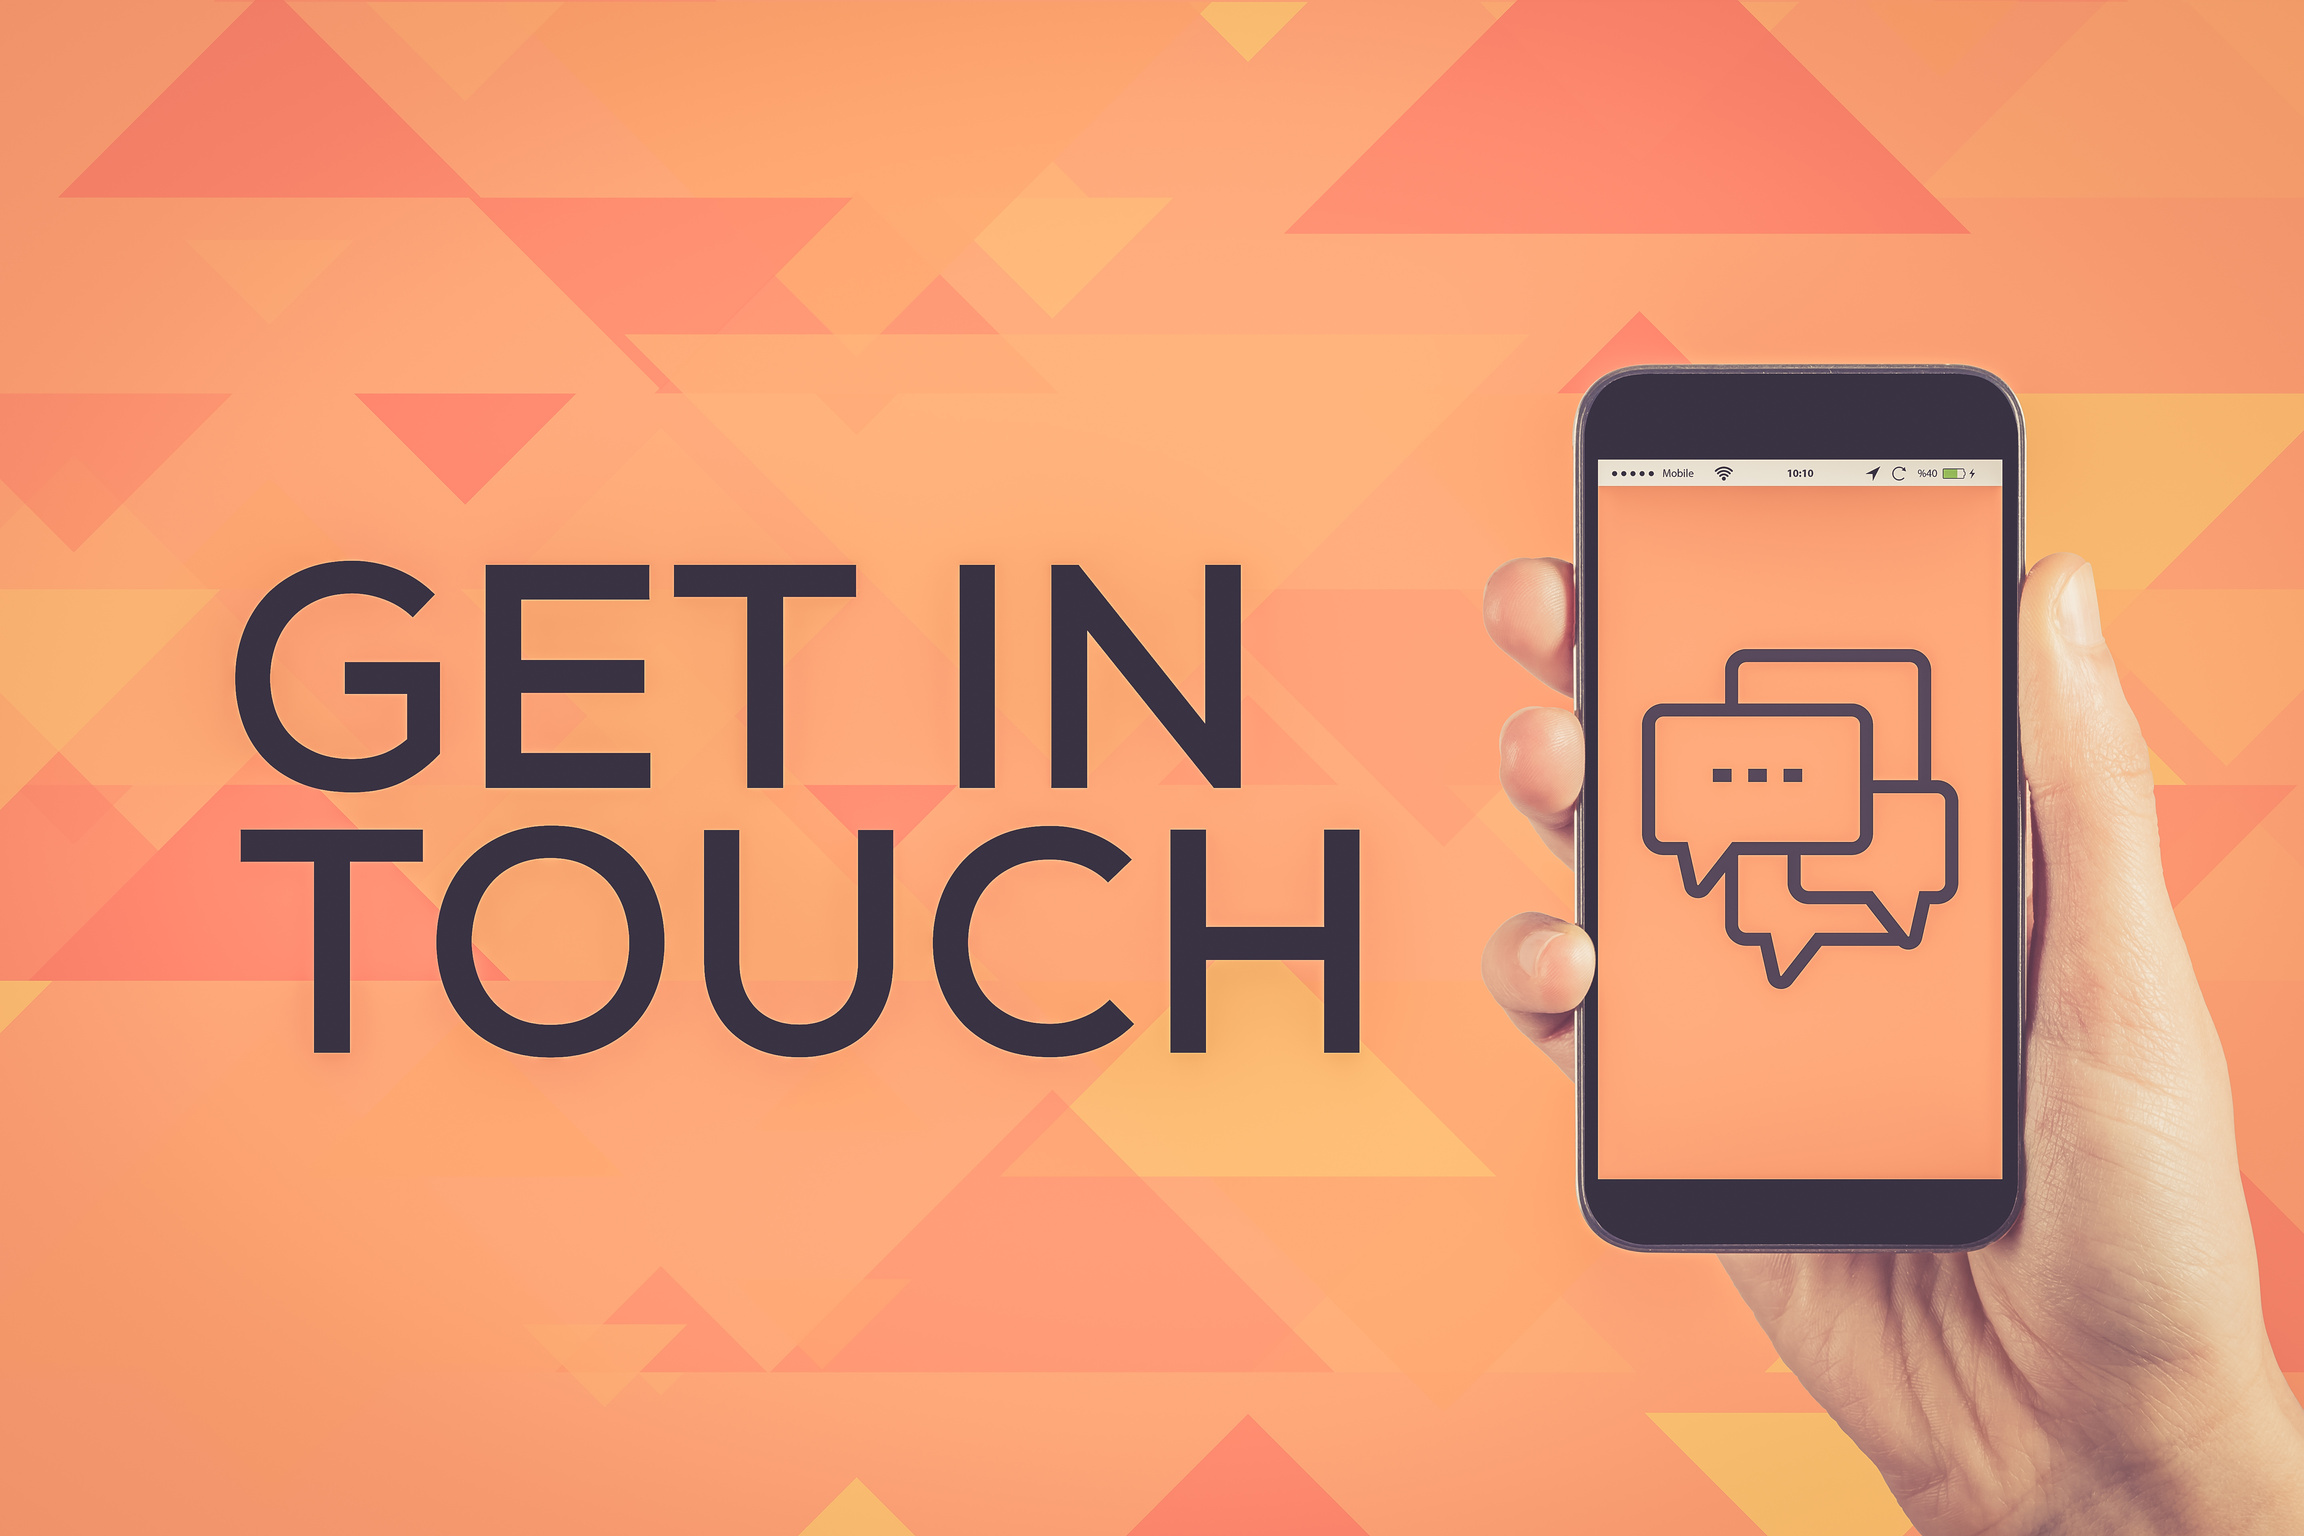 GET IN TOUCH CONCEPT